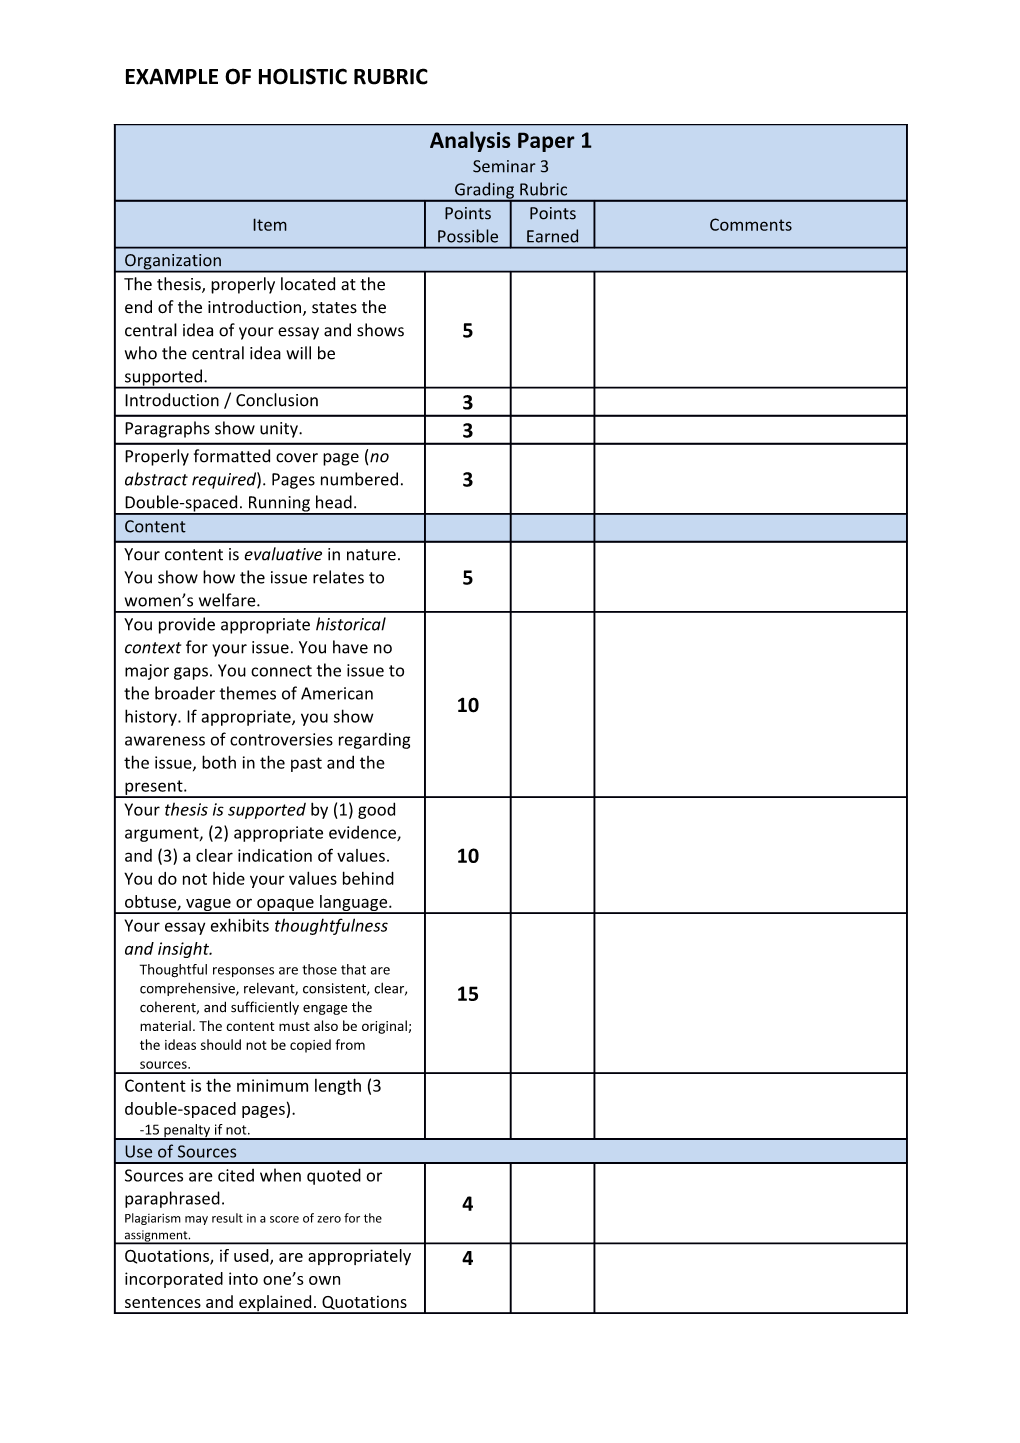 Example of Holistic Rubric